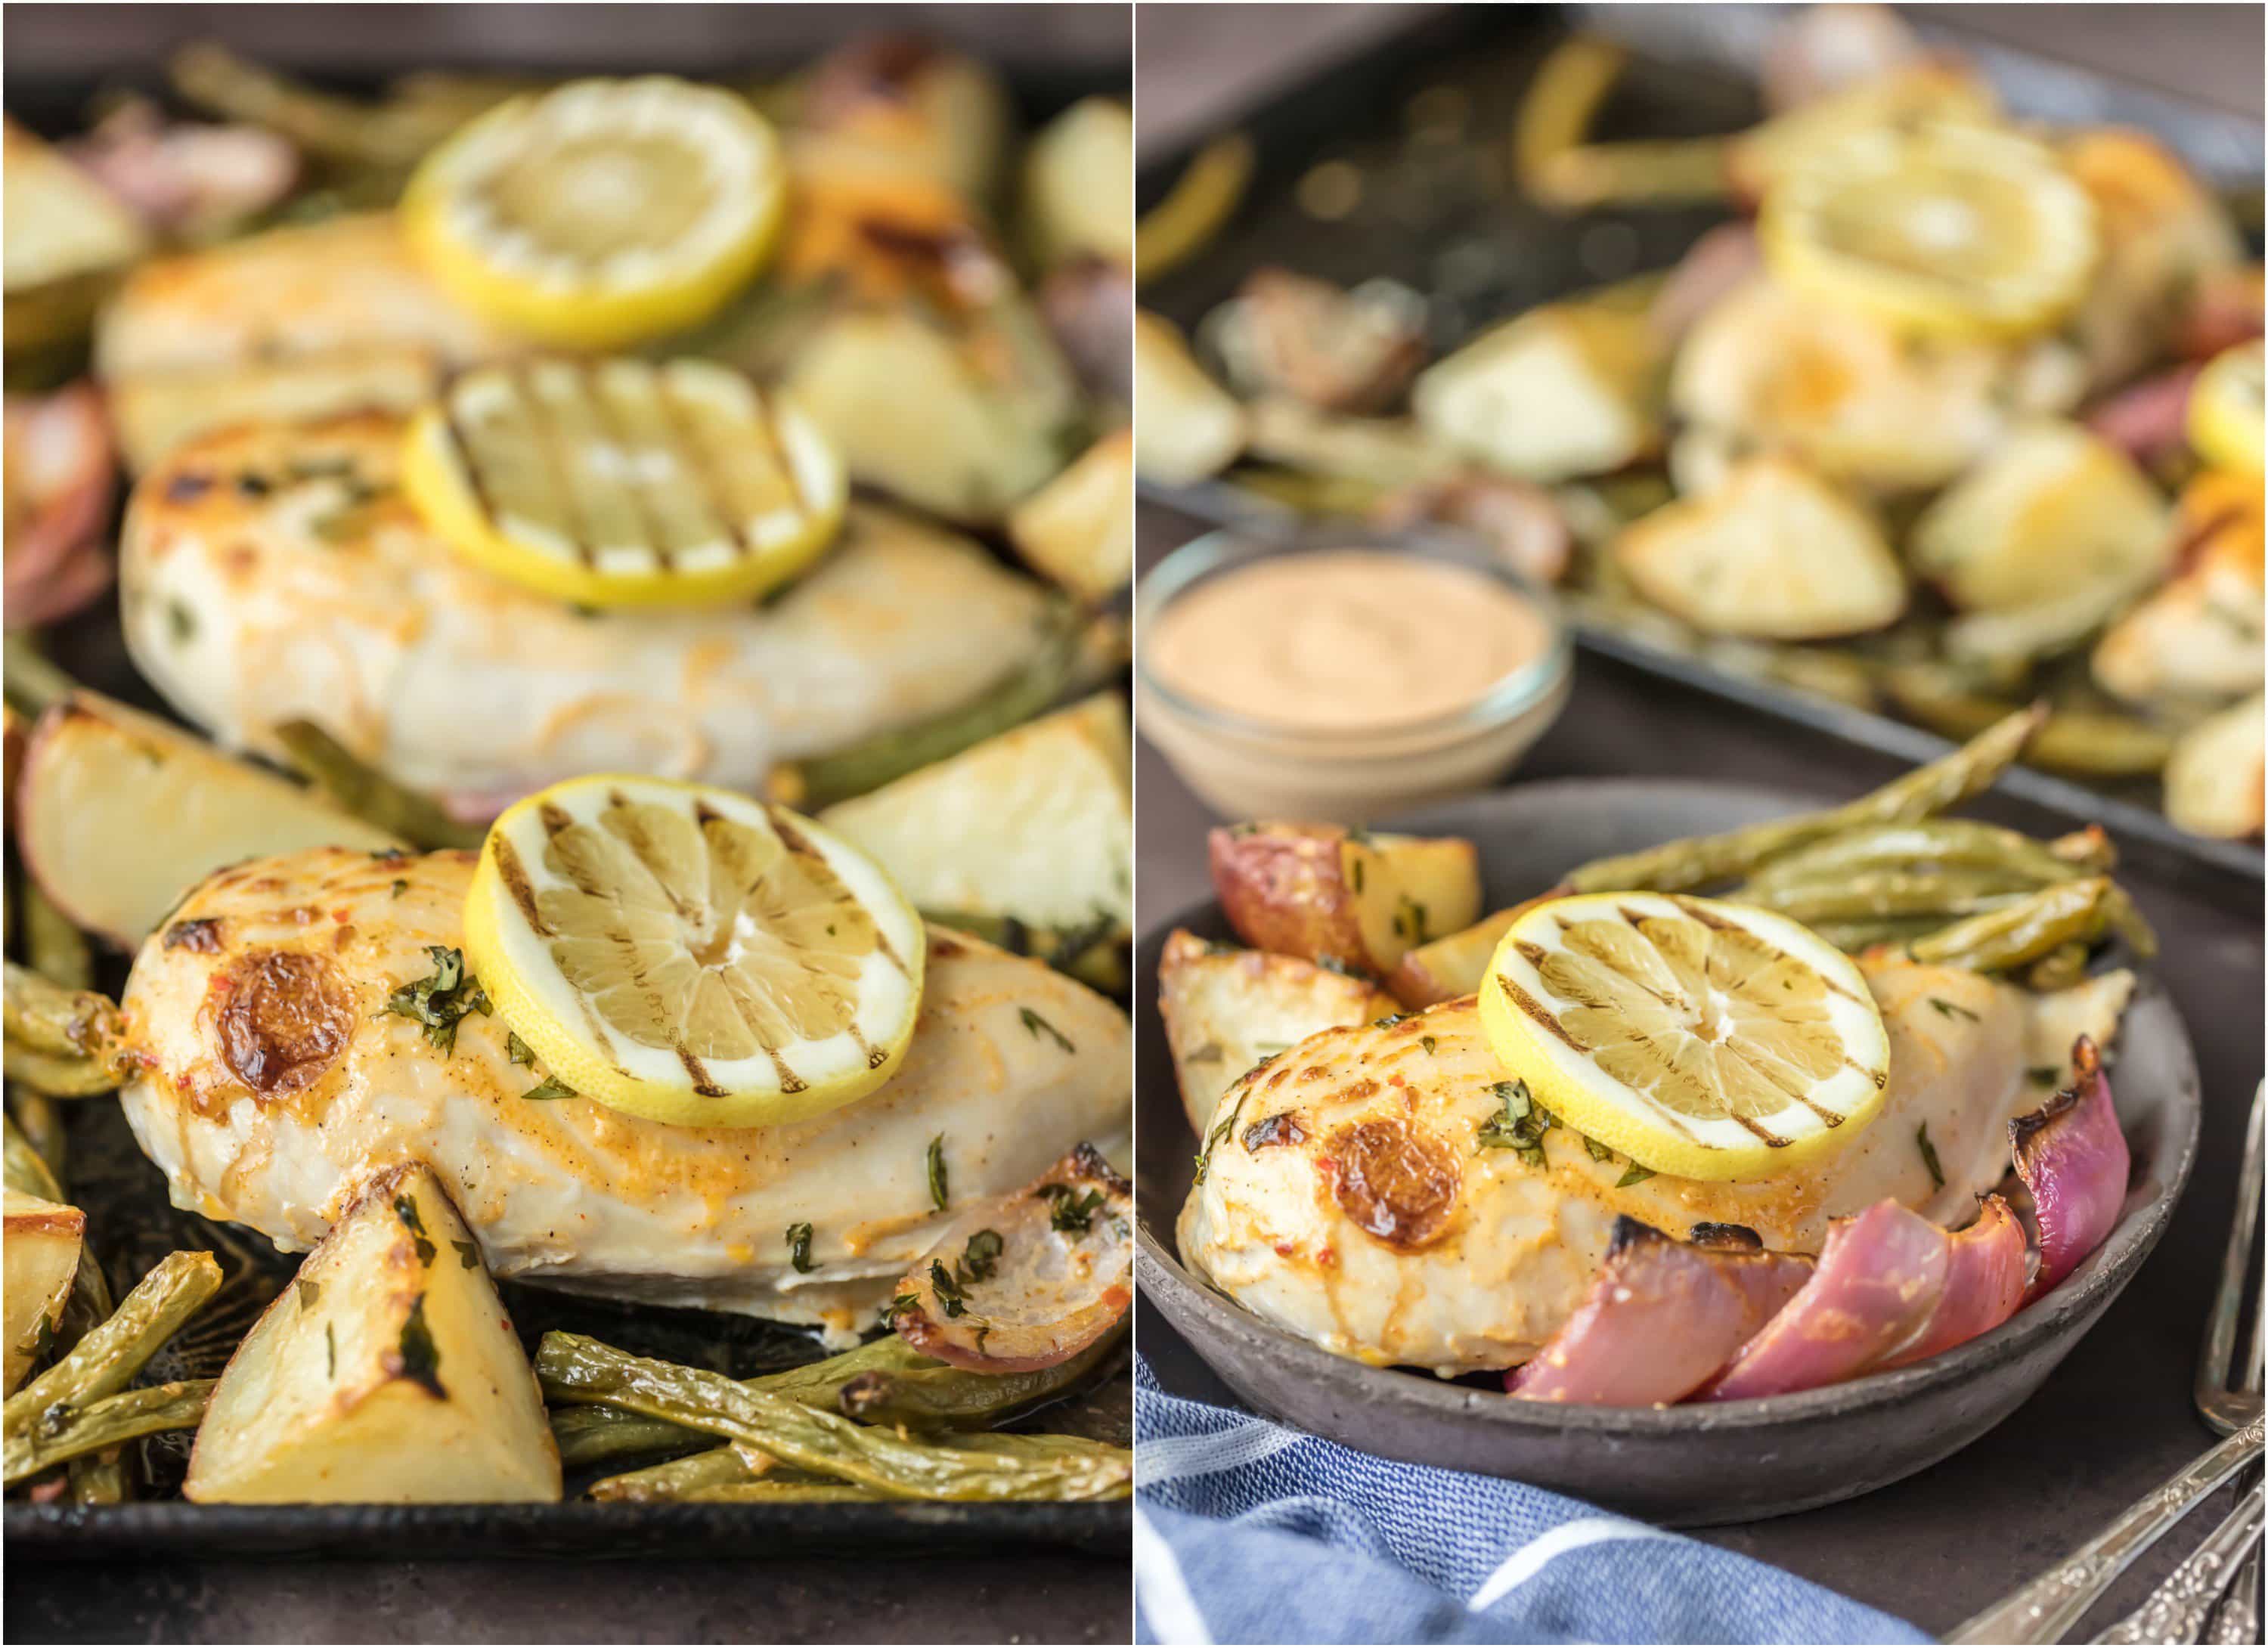 This ONE PAN CHILI LIME RANCH CHICKEN AND VEGETABLES is the absolute easiest healthy dinner recipe out there! Chicken, potatoes, green beans, and onion, tossed in ranch, all cook on one sheet pan. Delicious!